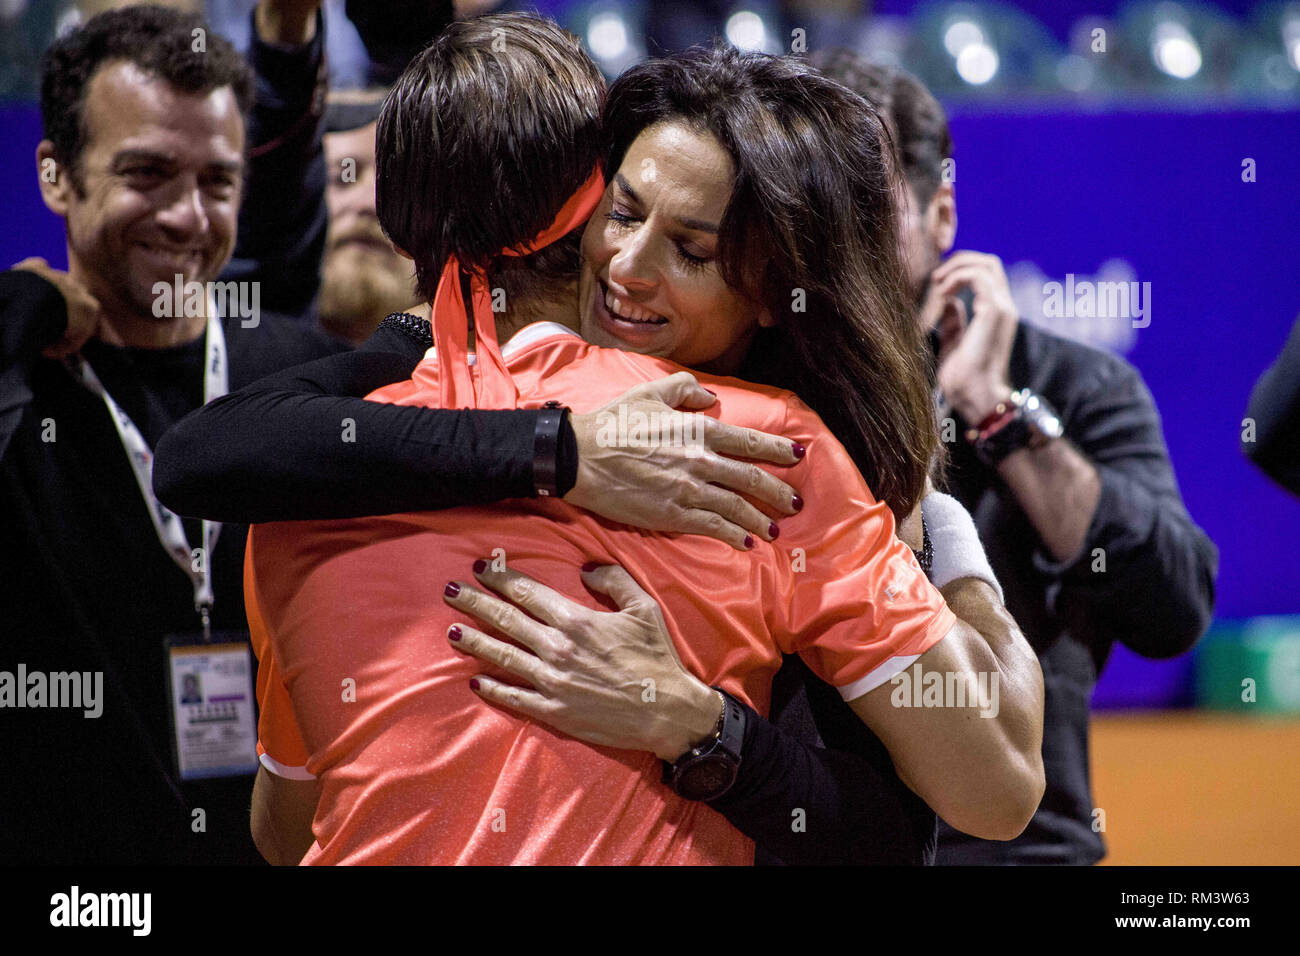 Buenos Aires, Federal Capital, Argentina. 12th Feb, 2019. Celebrities of the world of professional tennis honored David Ferrer in the Argentina Open 2019, ATP tournament category 250, a tournament that the Spaniard won three times and which marks the beginning of his farewell as a professional tennis player. This tribute was attended by Gabriela Sabatini, Diego Schwartzman; Monaco Peak; Guillermo Coria, Nicolas Pereira, among other tennis players and former professional tennis players. Credit: Roberto Almeida Aveledo/ZUMA Wire/Alamy Live News Stock Photo